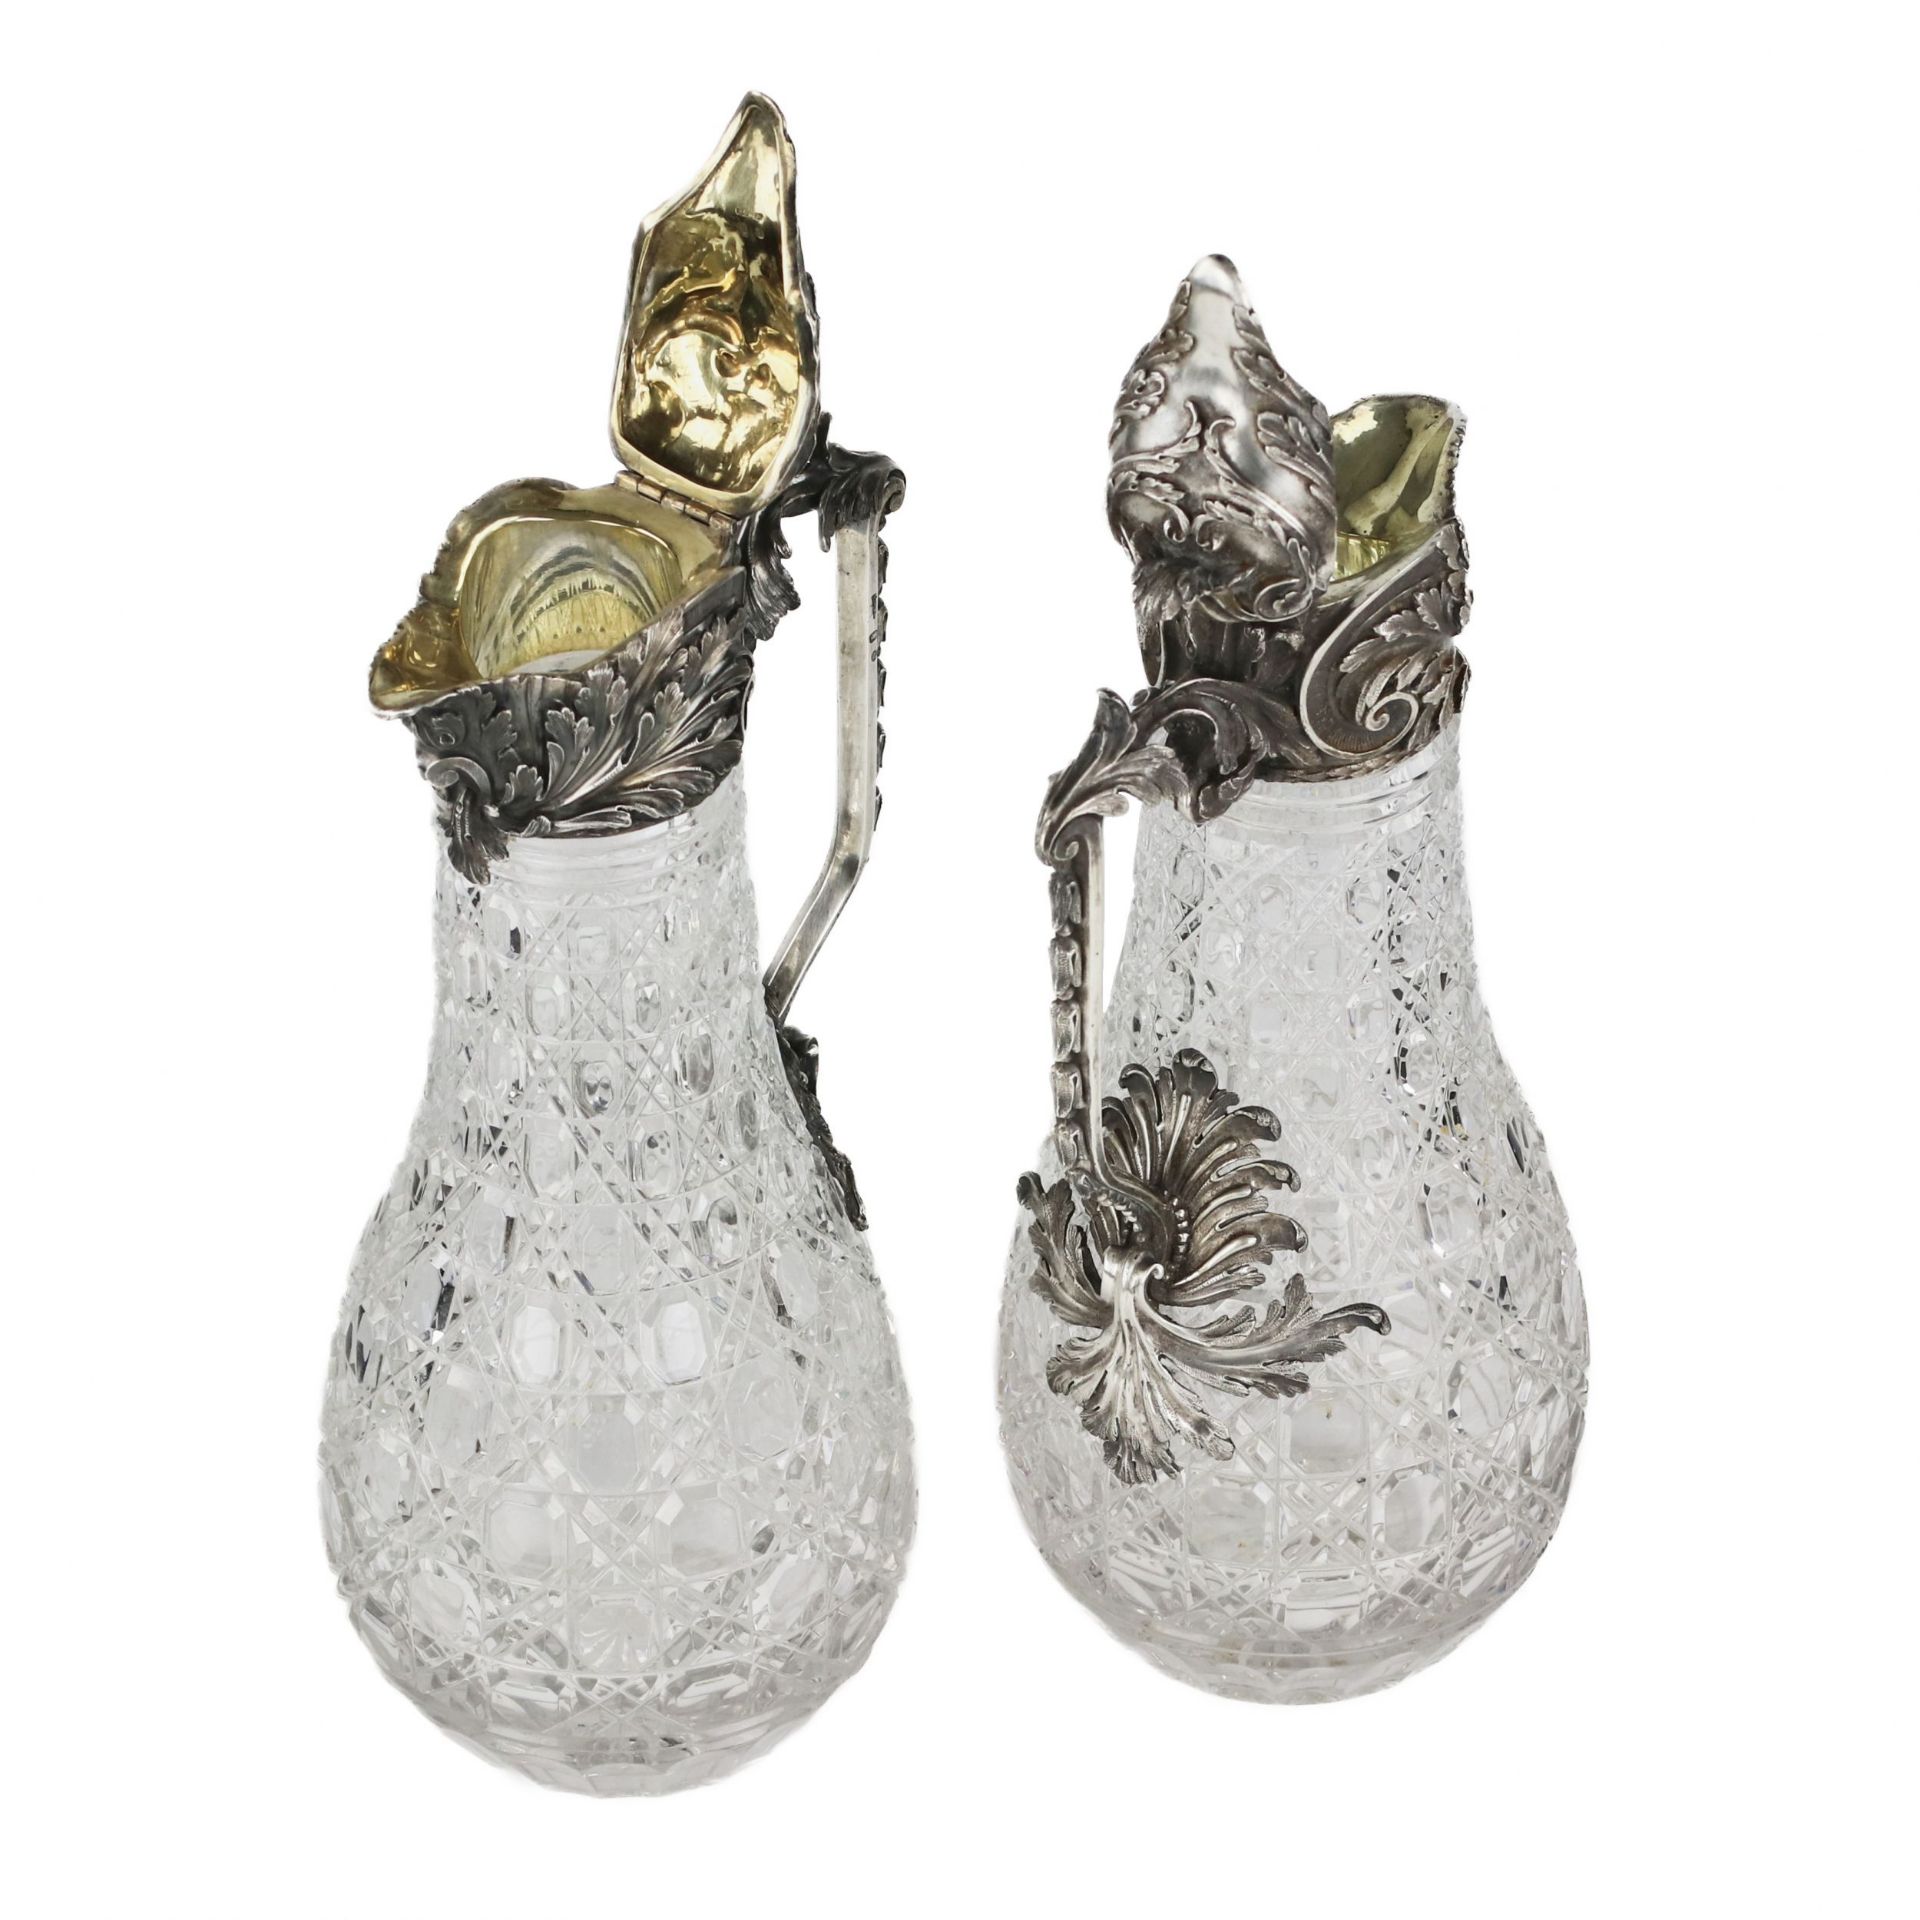 A magnificent pair of cast crystal wine jugs in superb BOLIN silver. Moscow. Russia 19th century. - Image 4 of 7